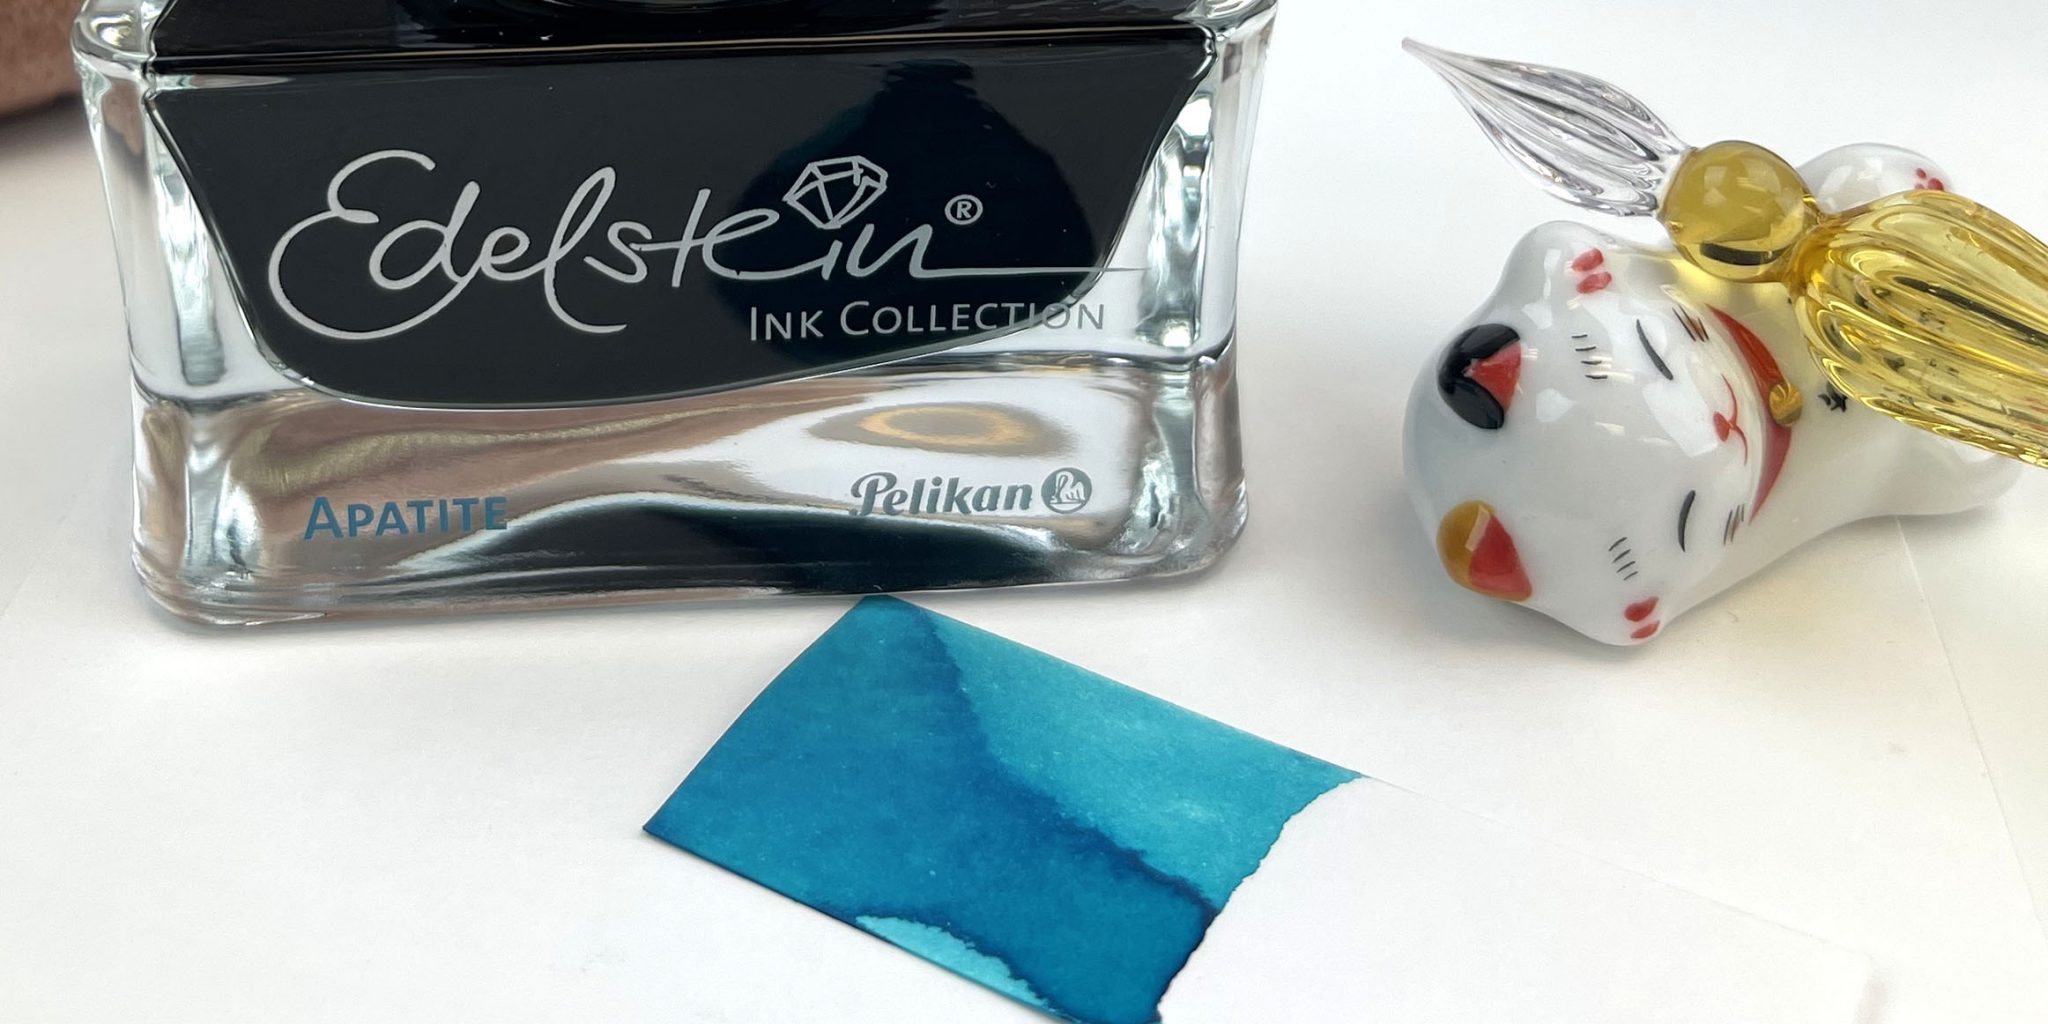 Pelikan Edelstein Apatite Ink Review & Giveaway 2022 Ink of the Year